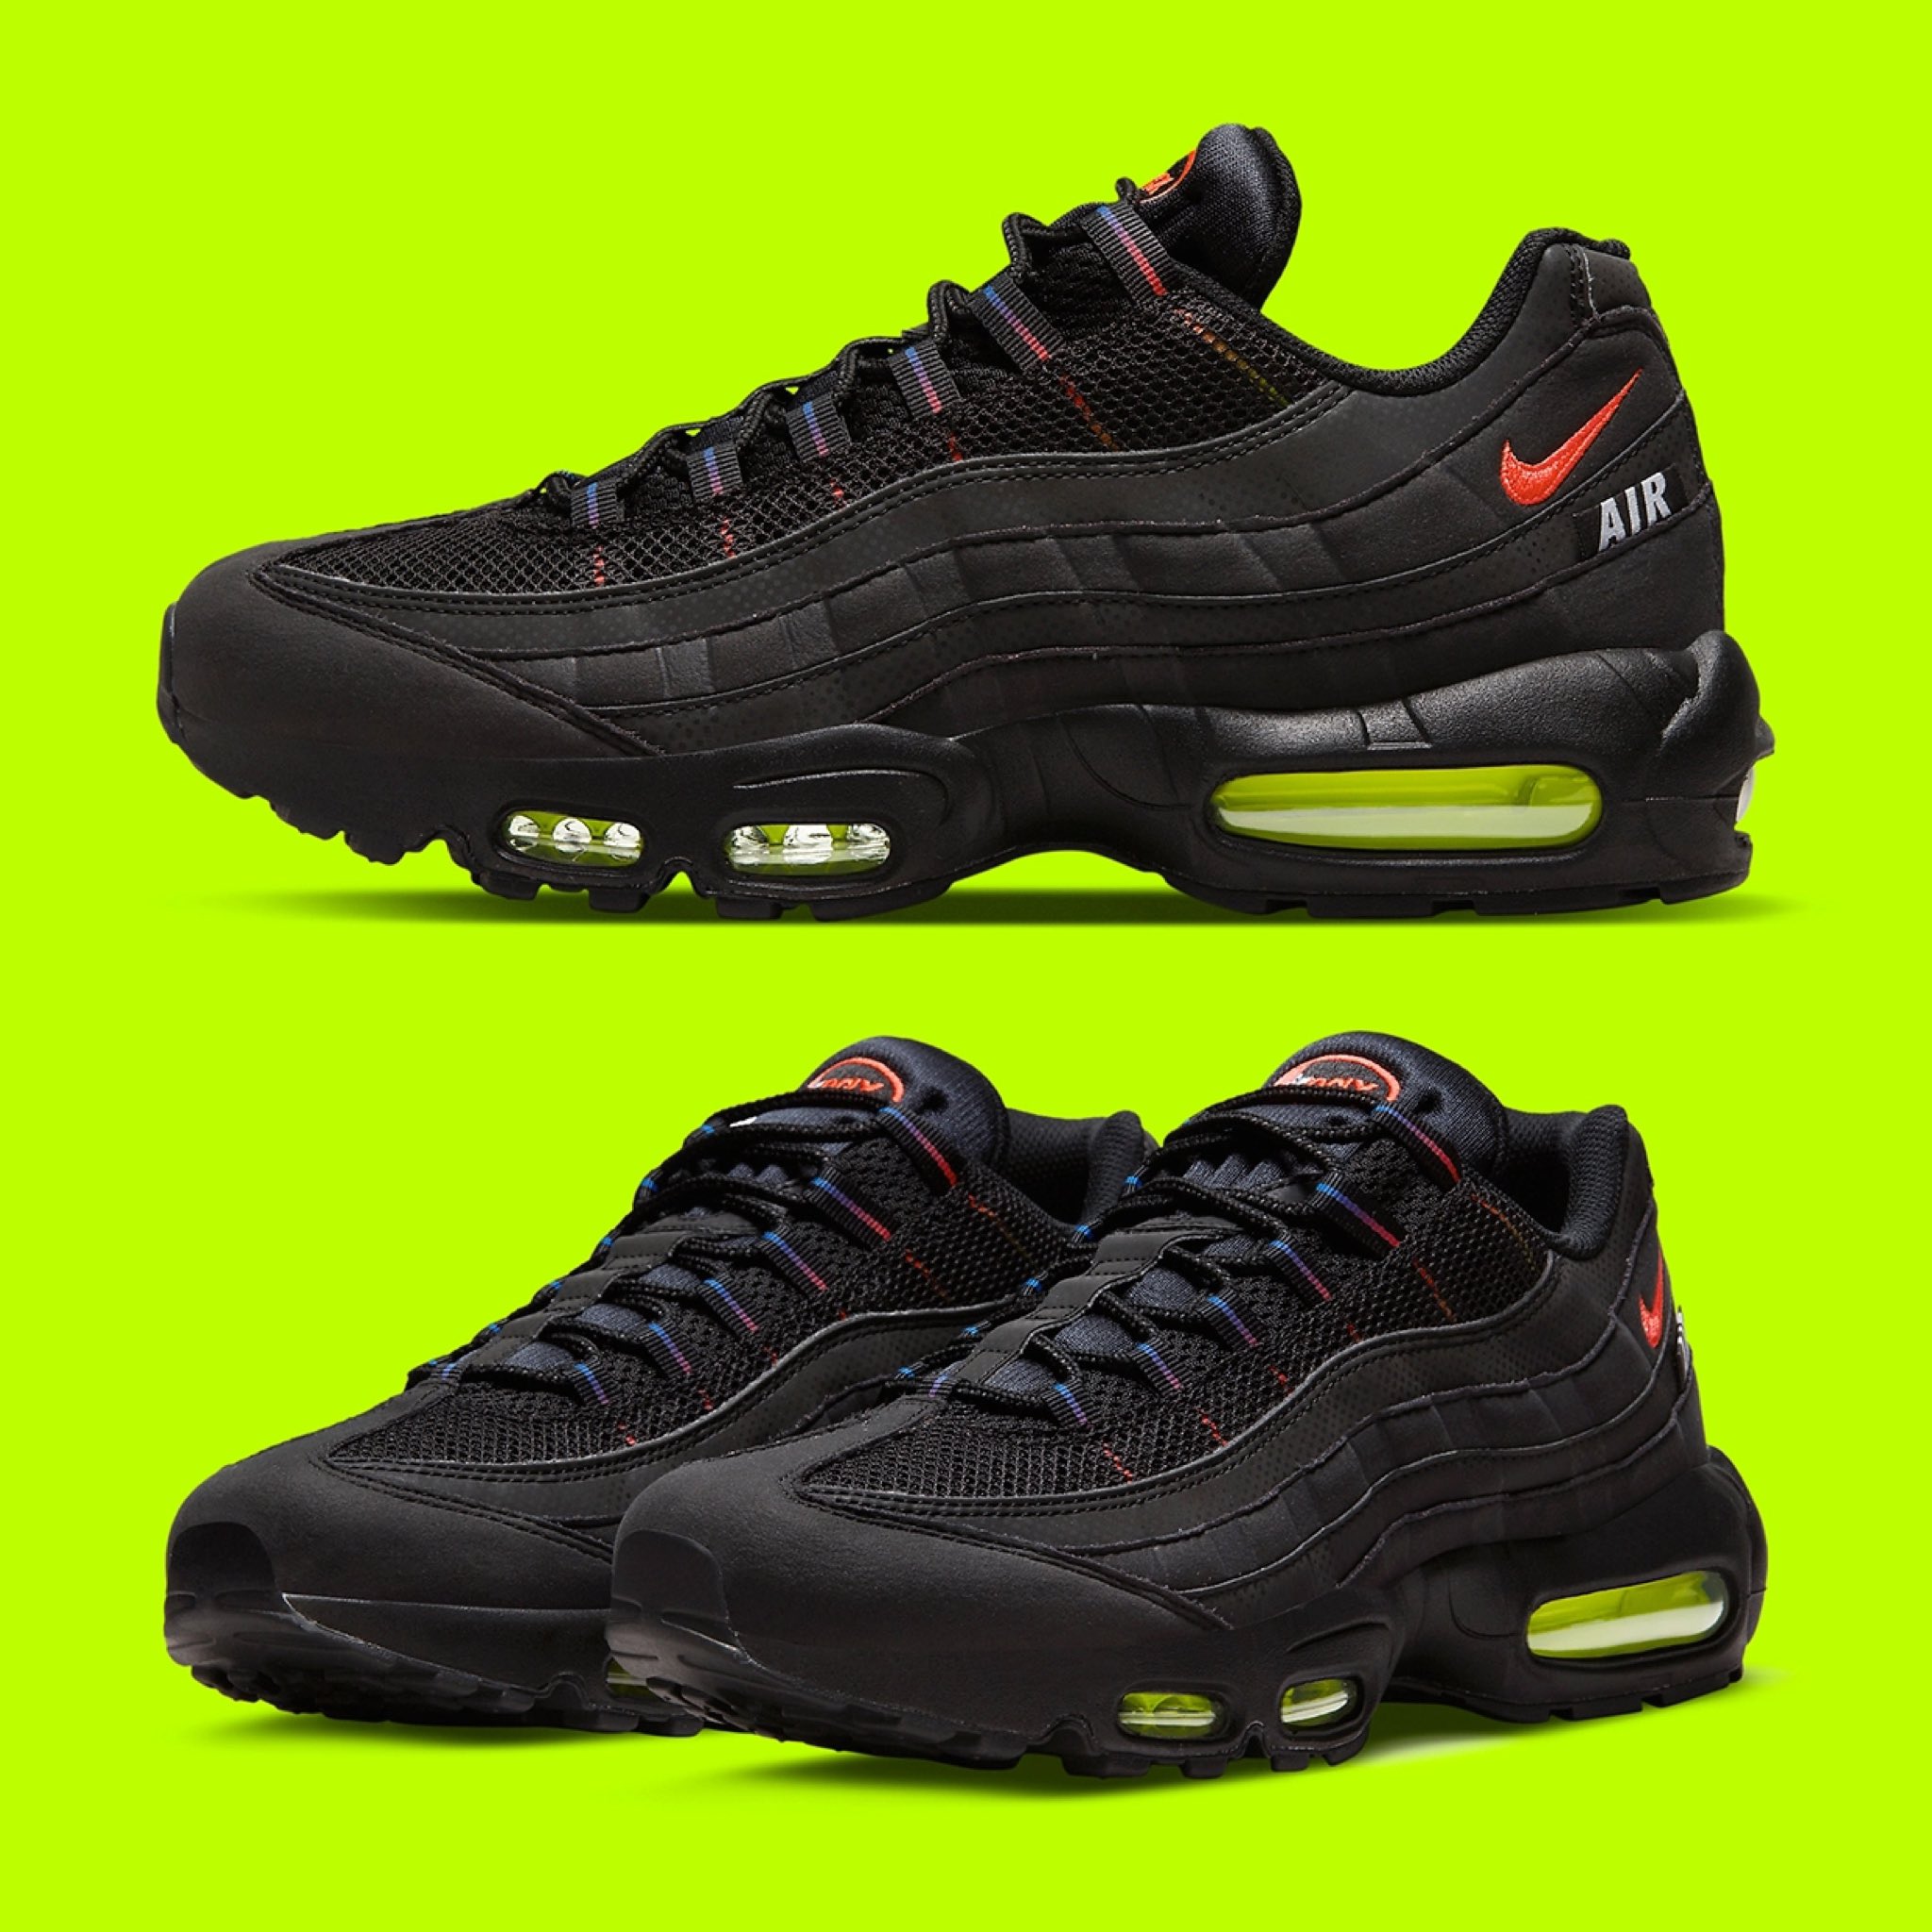 Bennetts on Twitter: "🚨👟 | Nike Air Max 95 Black/Volt/Crimson 🔑 Selling out Nike, but have also released Foot Locker £165 - UK5.5 to UK14 available 🏆 Link: https://t.co/KezwgbHIJk